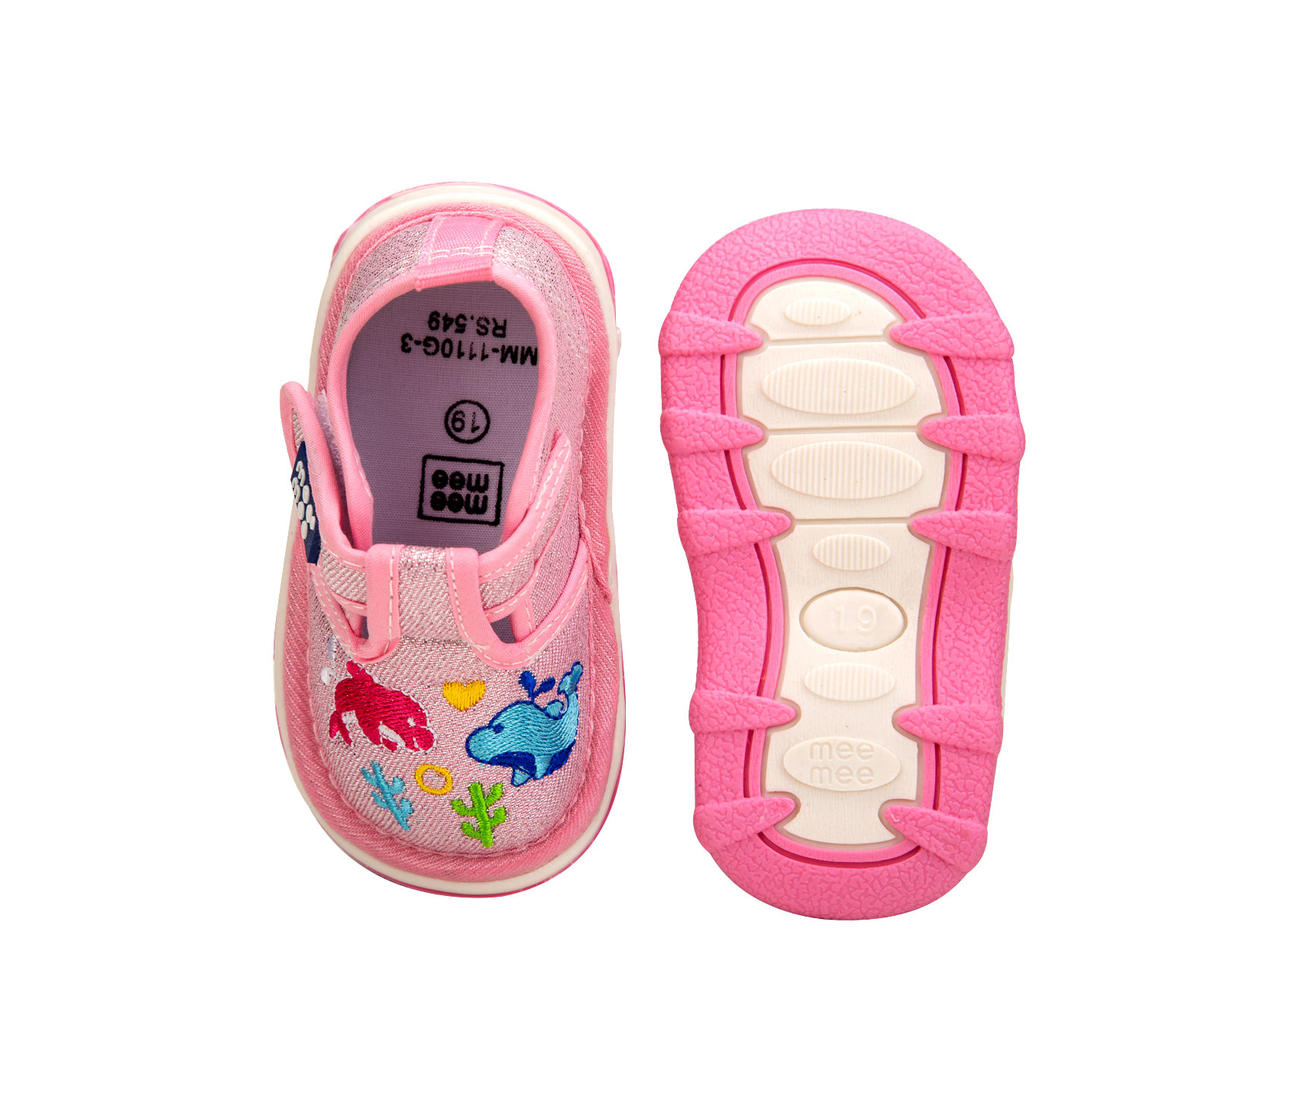 sound shoes for baby girl